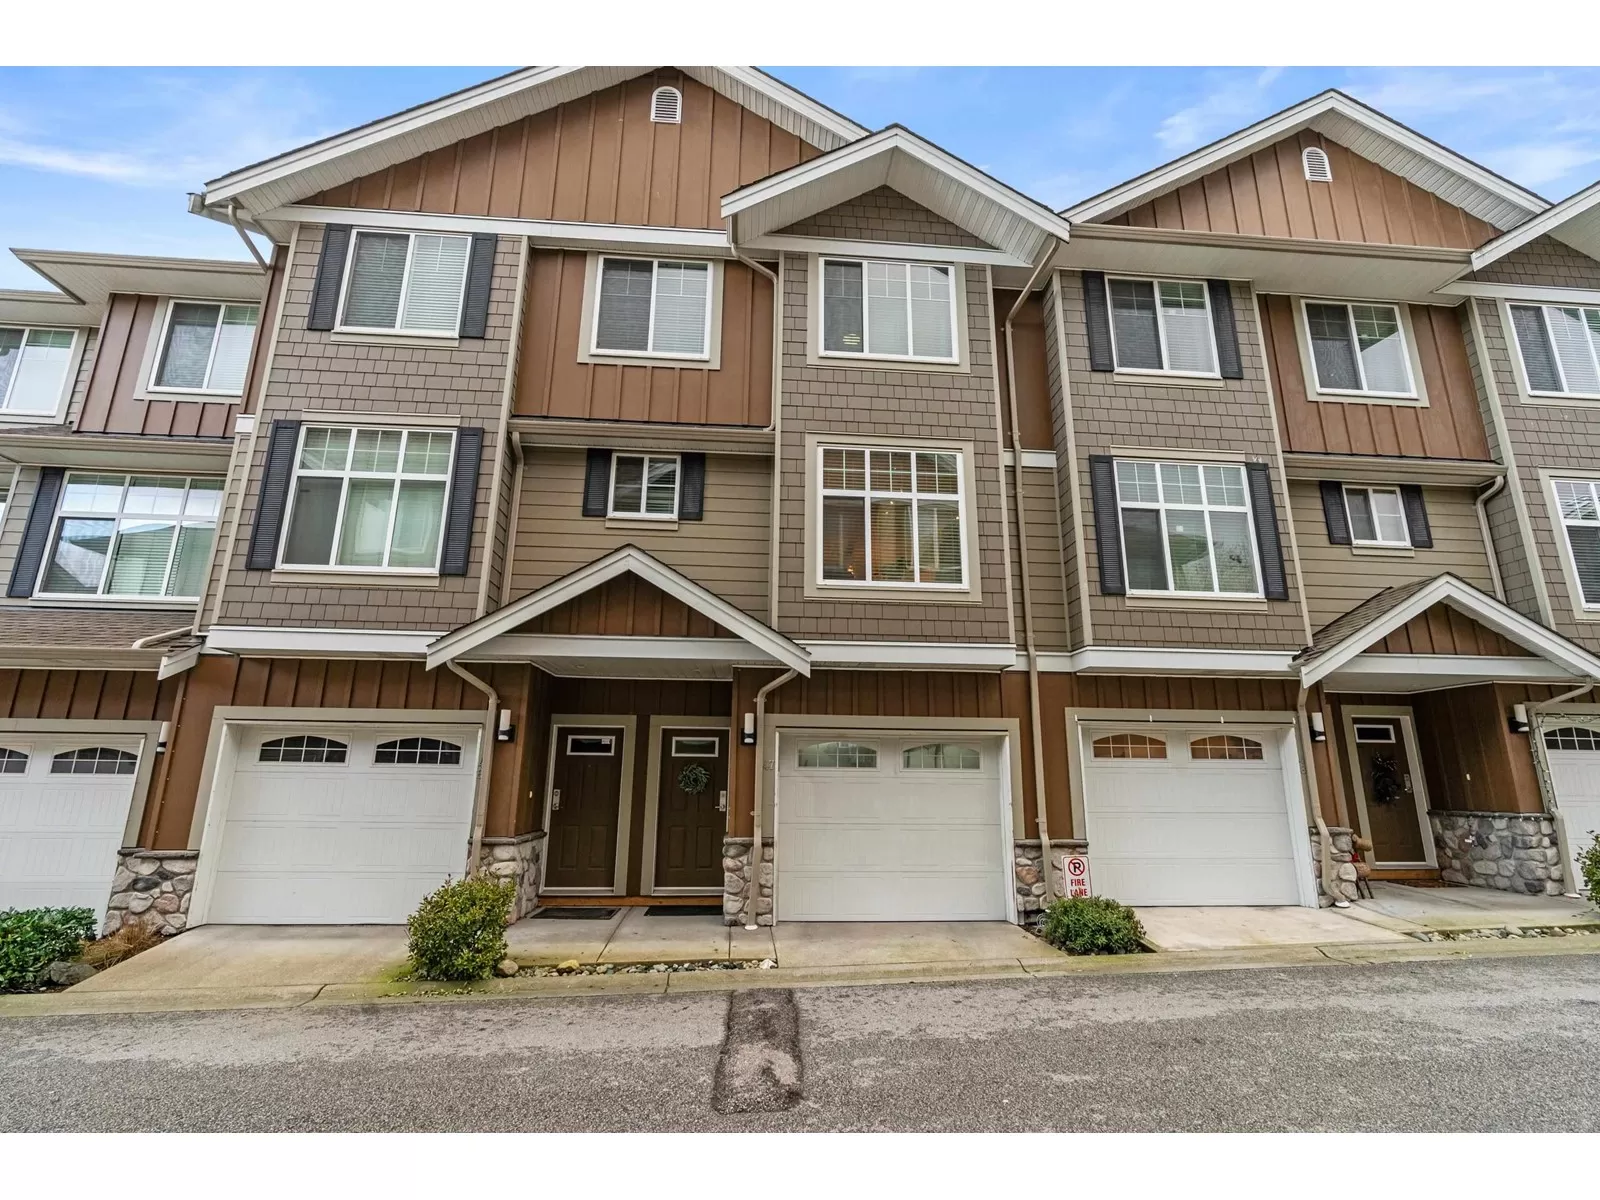 Row / Townhouse for rent: 47 3009 156 Street, Surrey, British Columbia V3Z 0N9